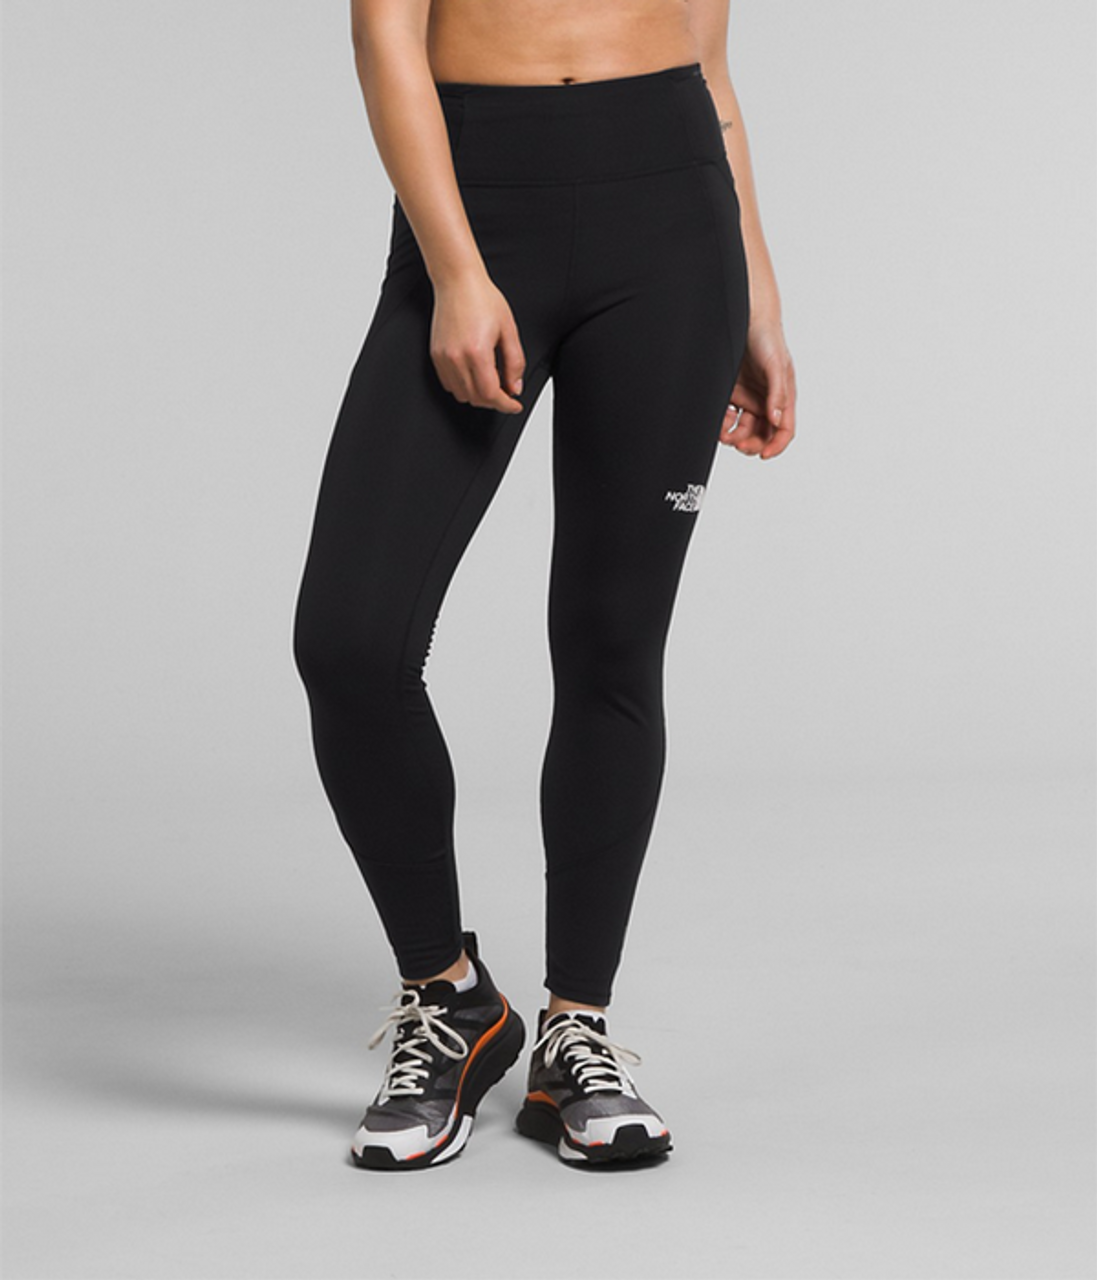 The North Face Winter Warm Pro Tights - Women's